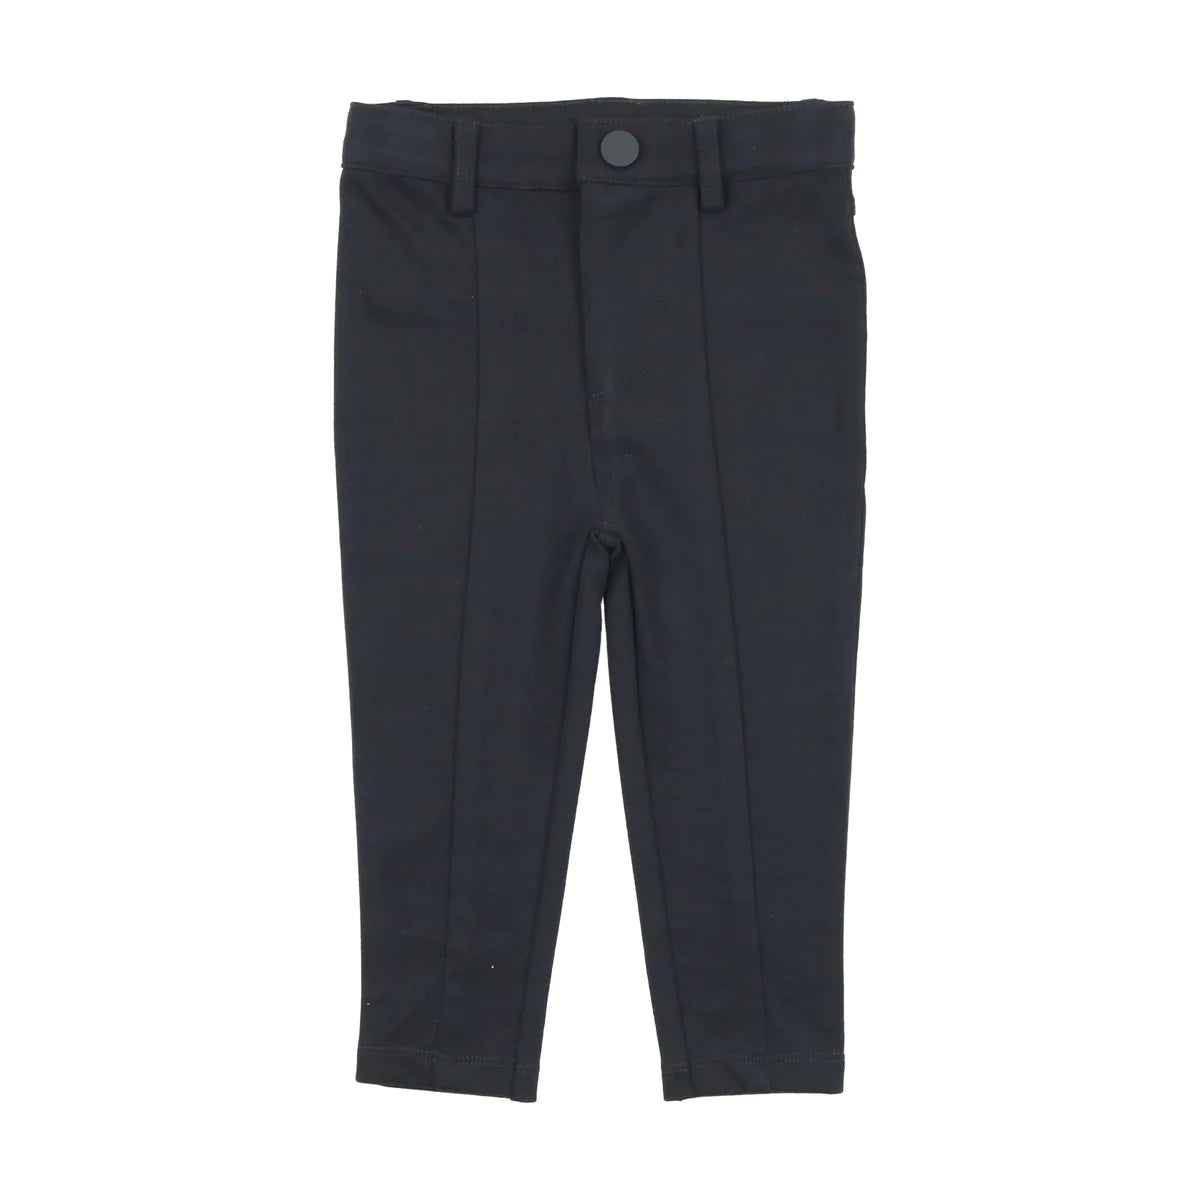 Navy Knit Stretch Pants with Seam